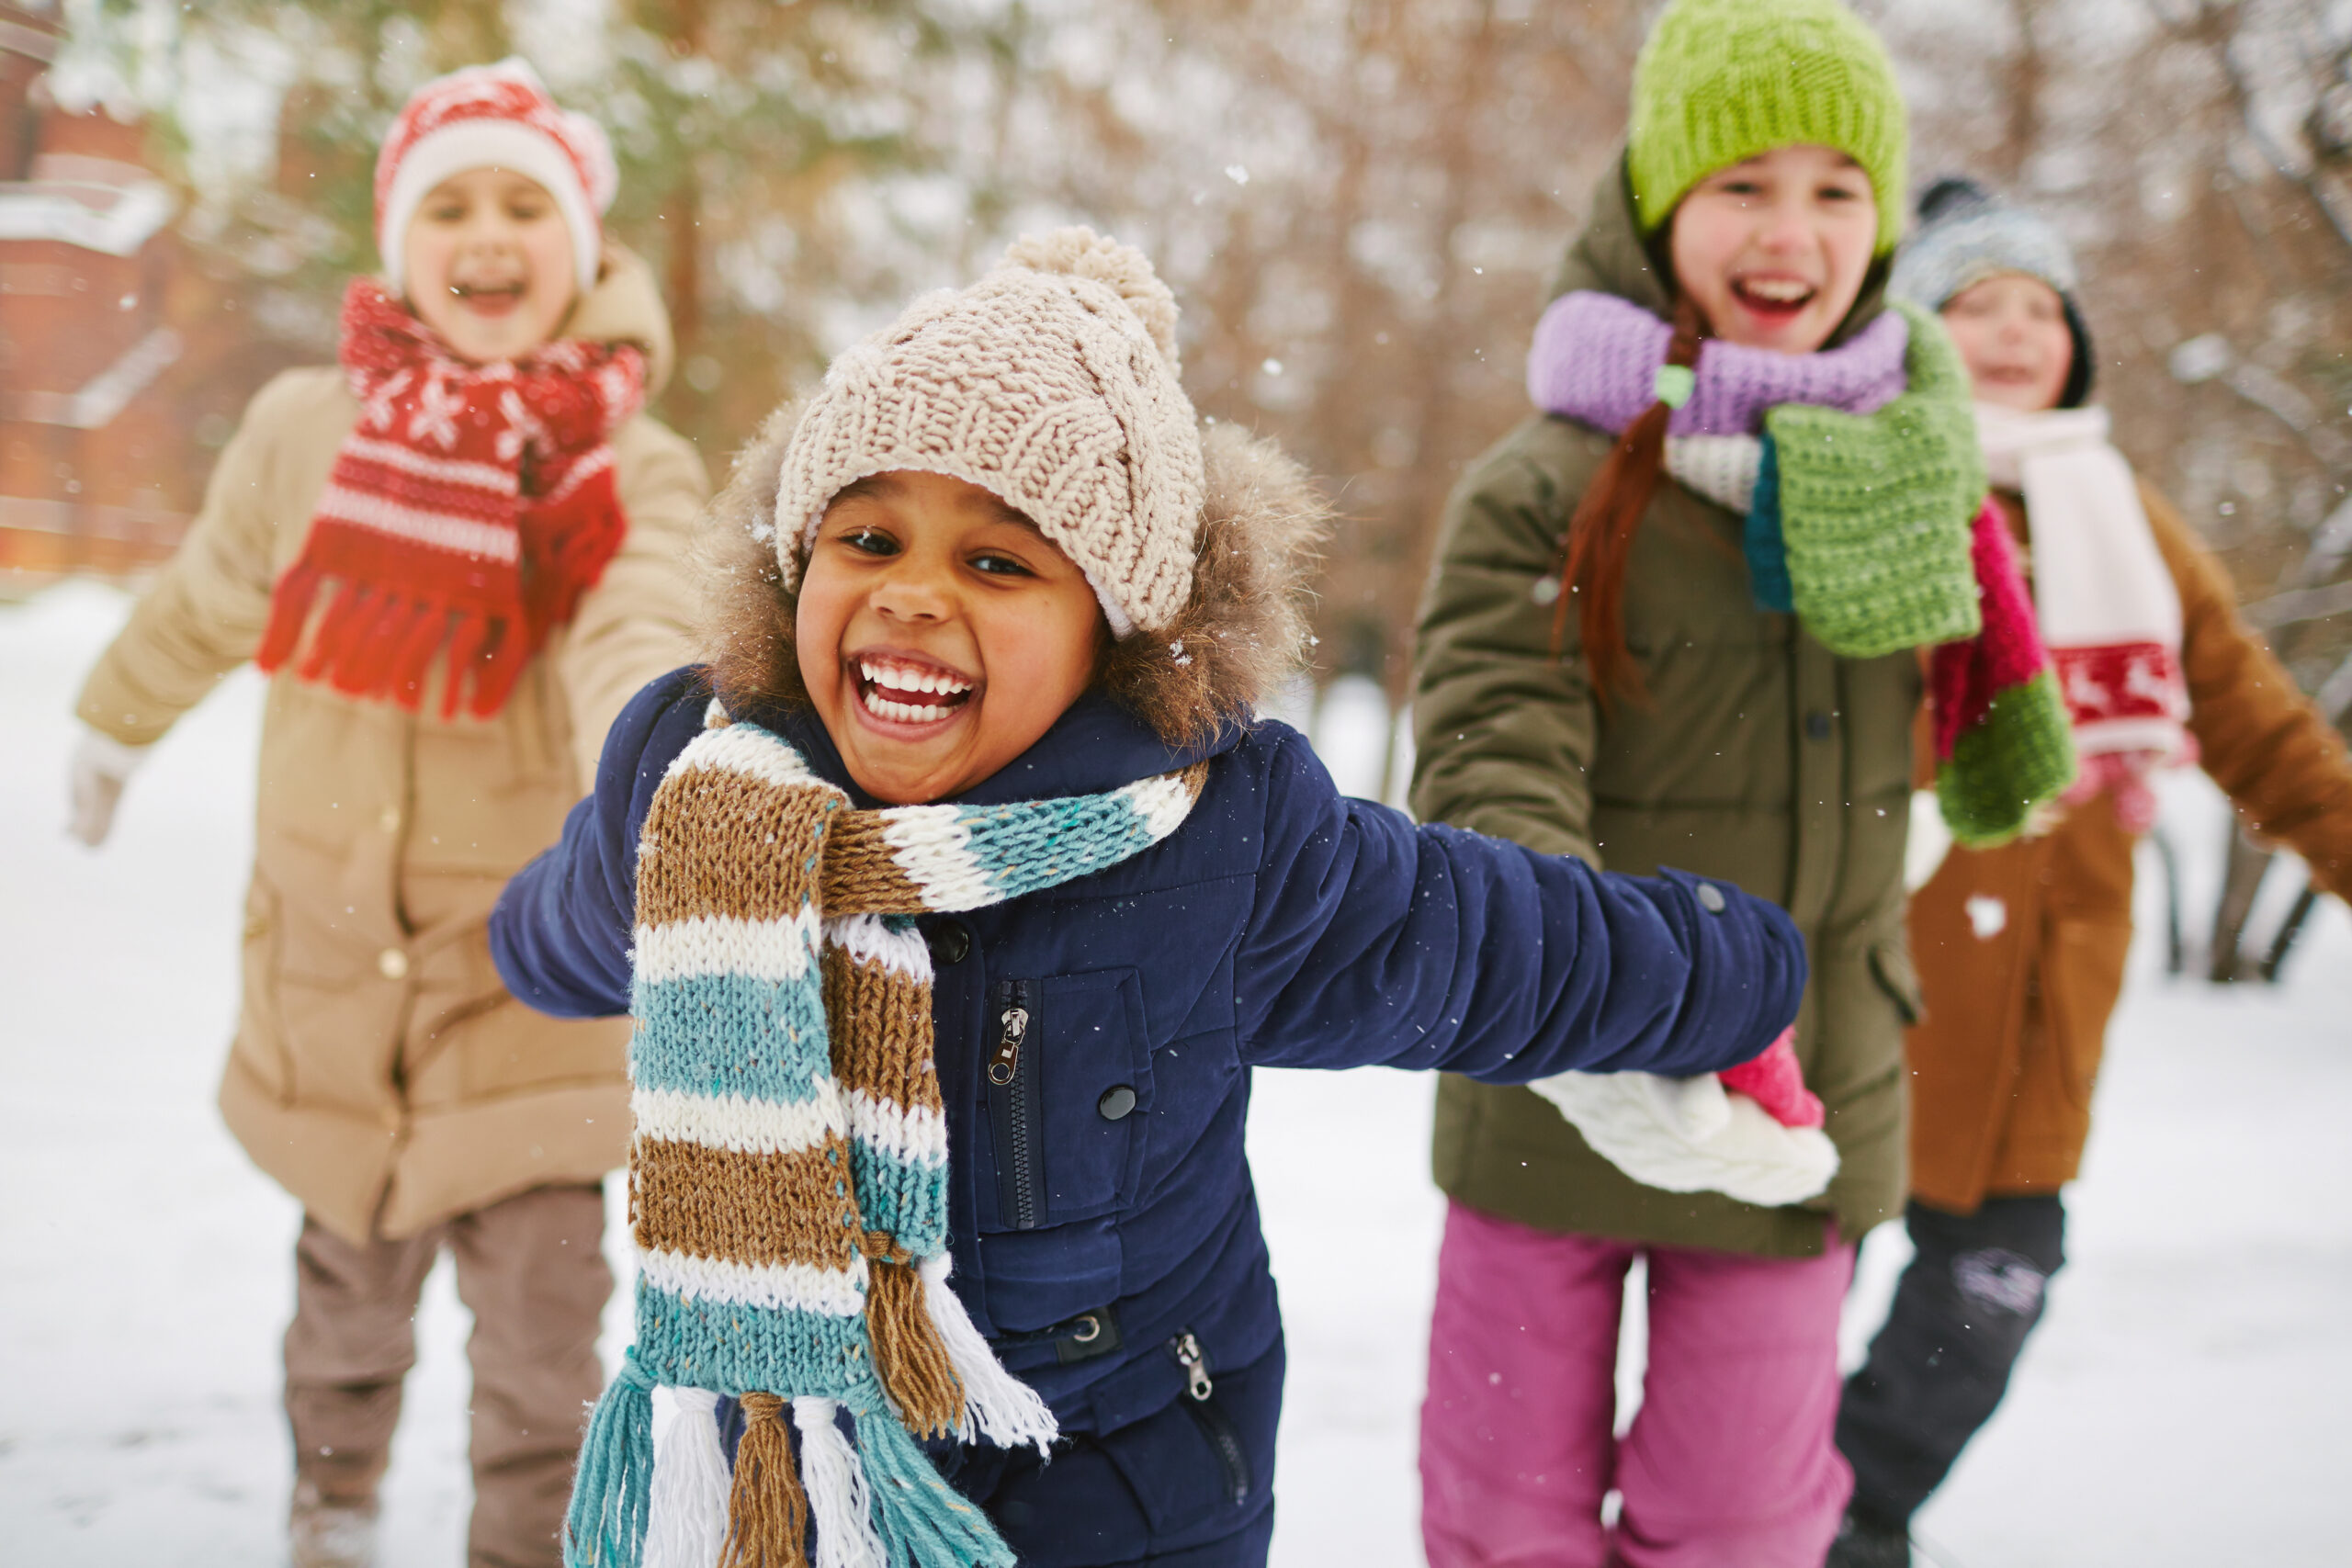 Cheerful children in snow gear playing outside in the snow